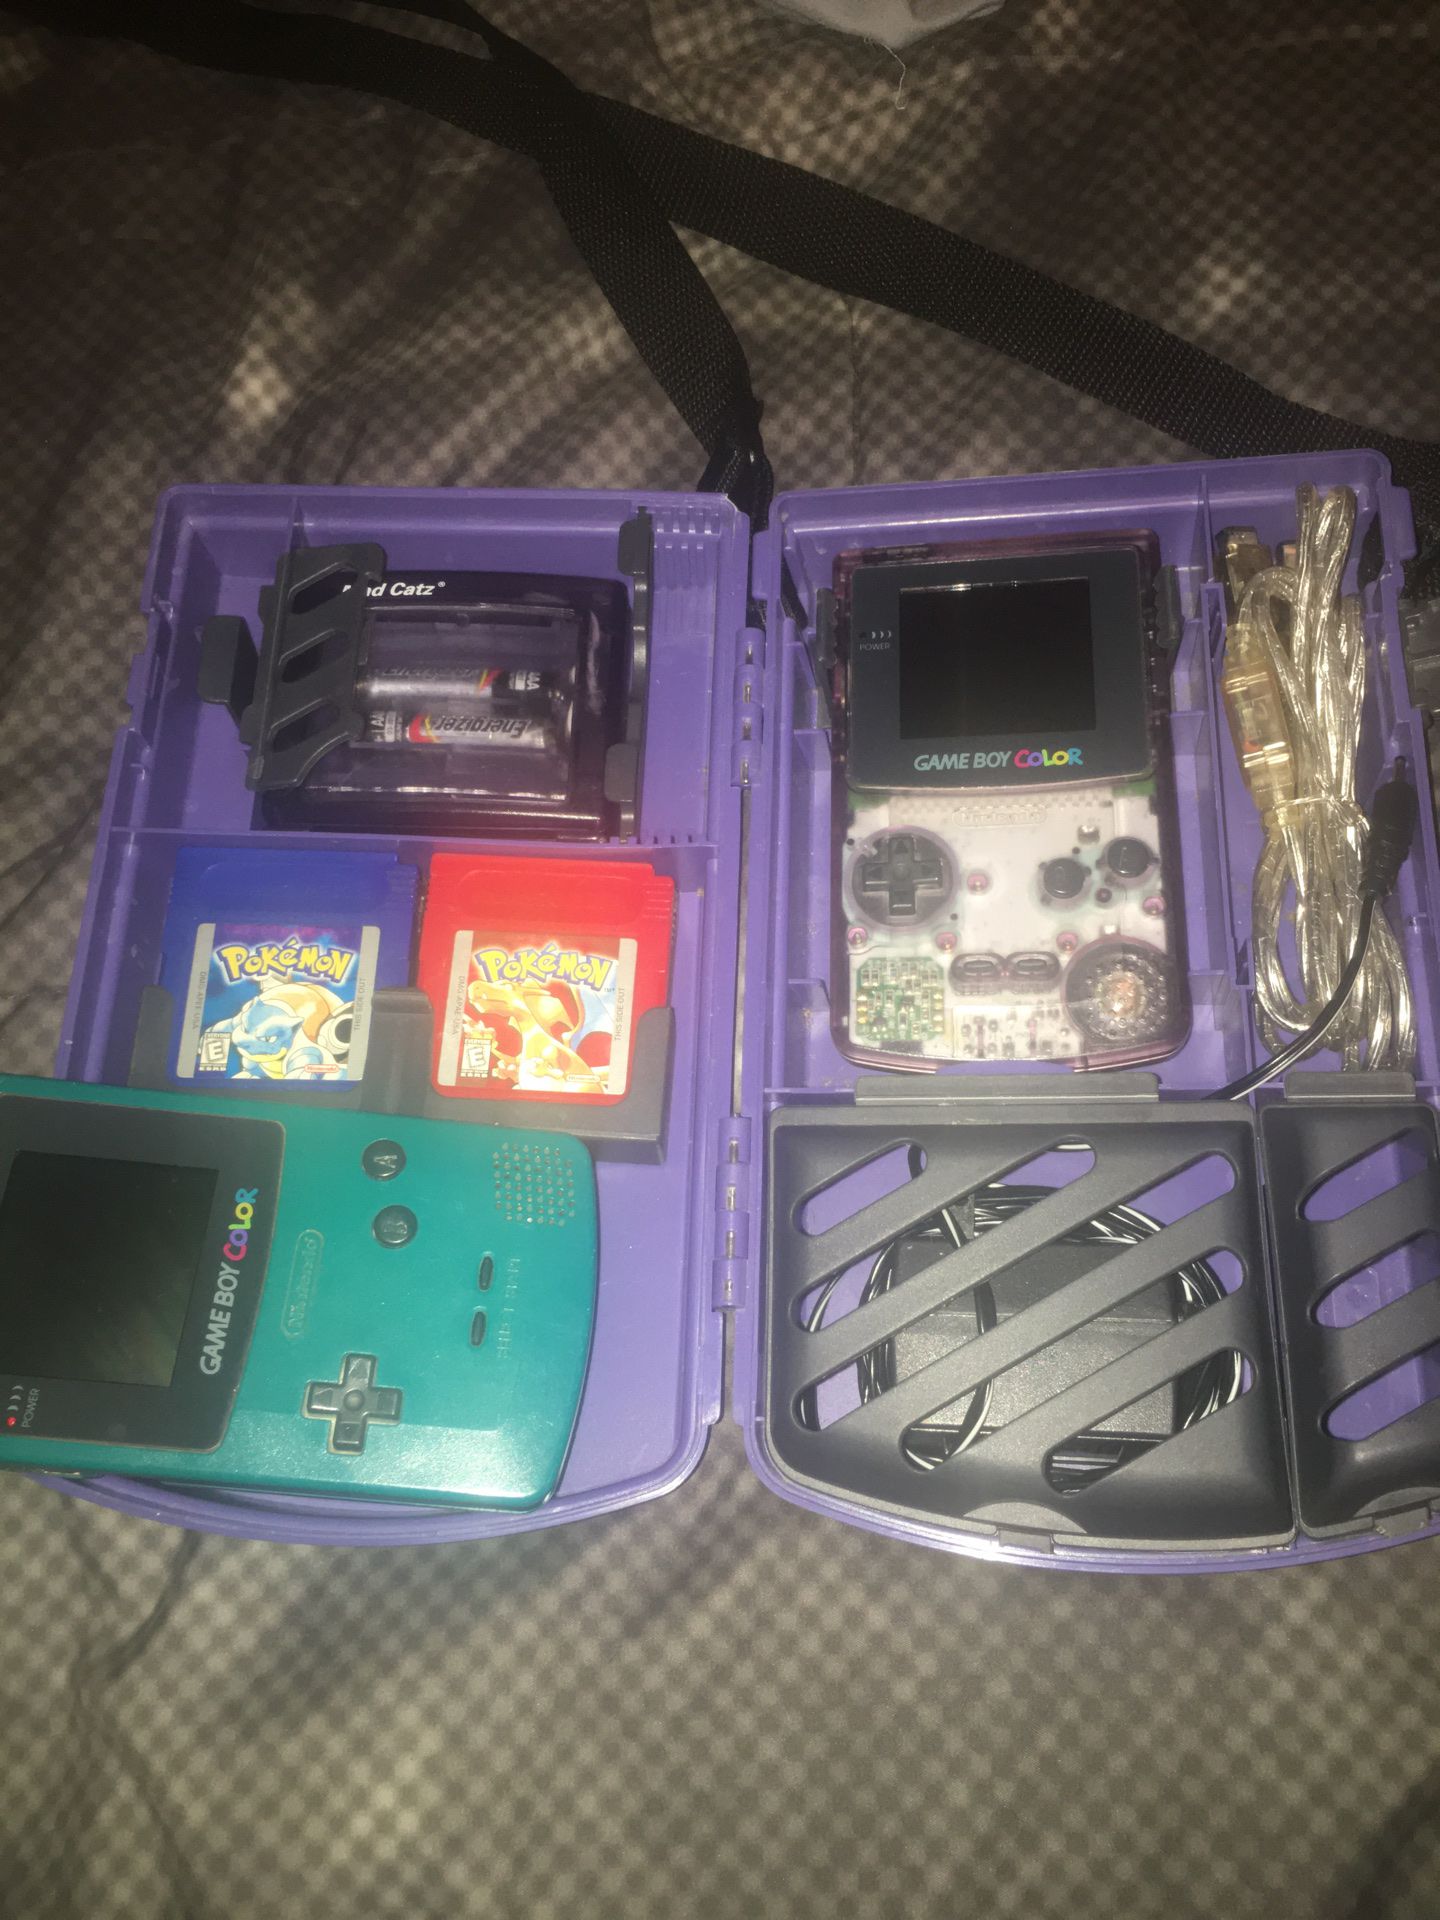 Pokémon Yellow GBA Authentic for Sale in Modesto, CA - OfferUp